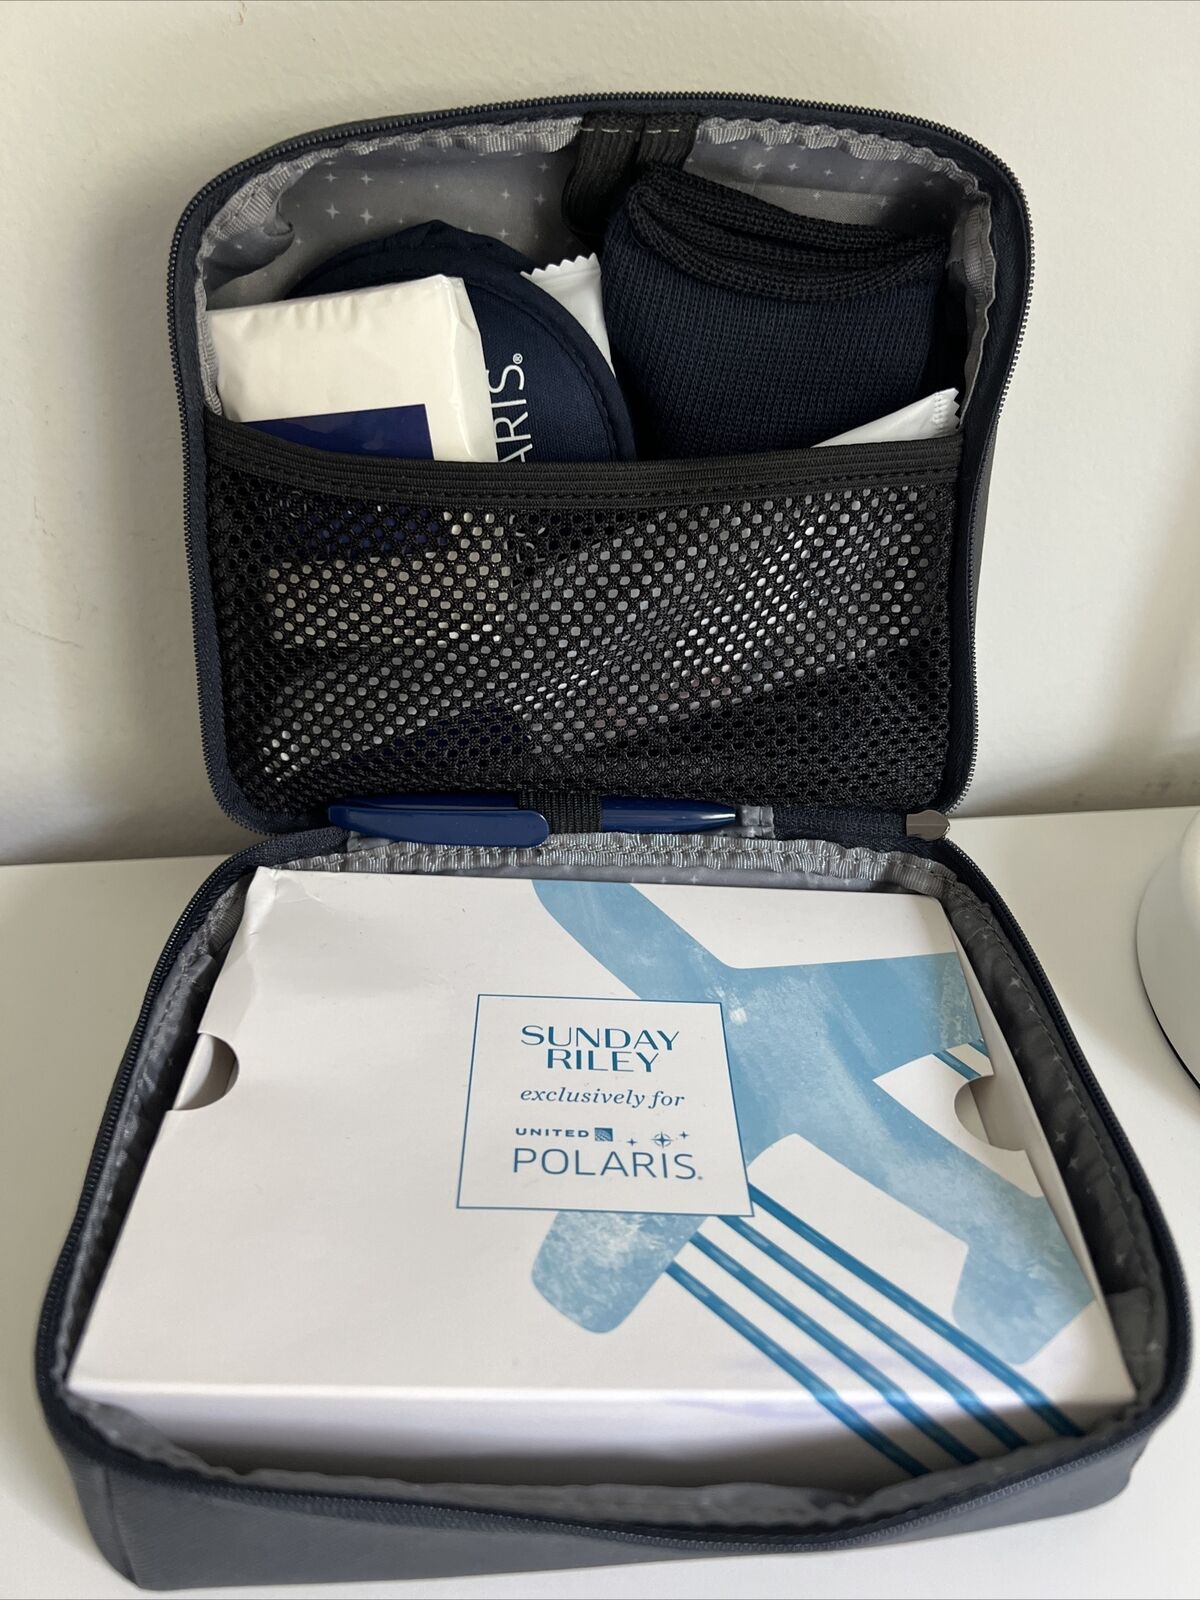 NEW UNITED AIRLINES Amenity Kit Bag Polaris First Class Sunday Riley Blue CIN